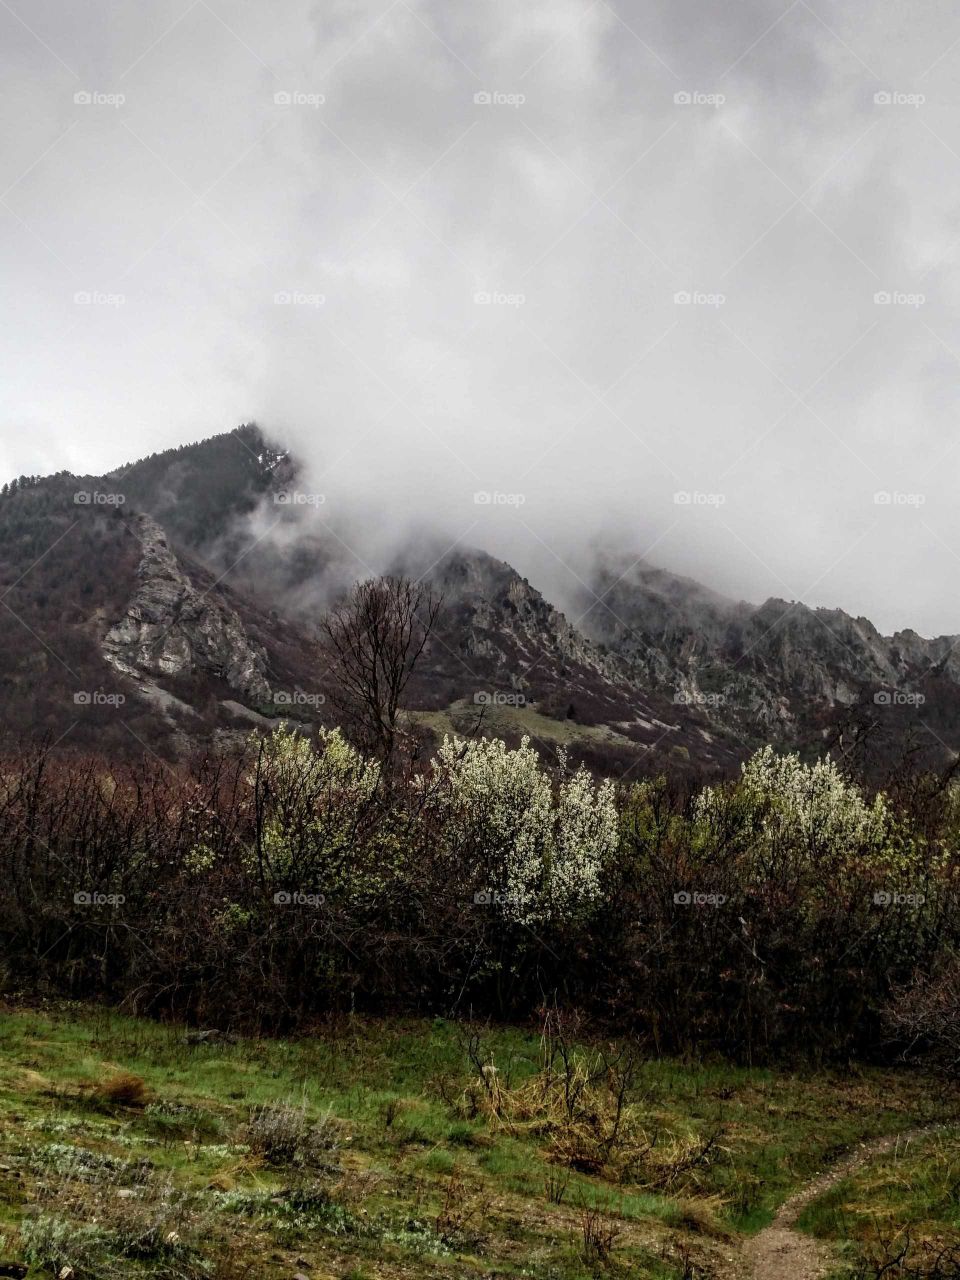 flowering trees and misty mountains